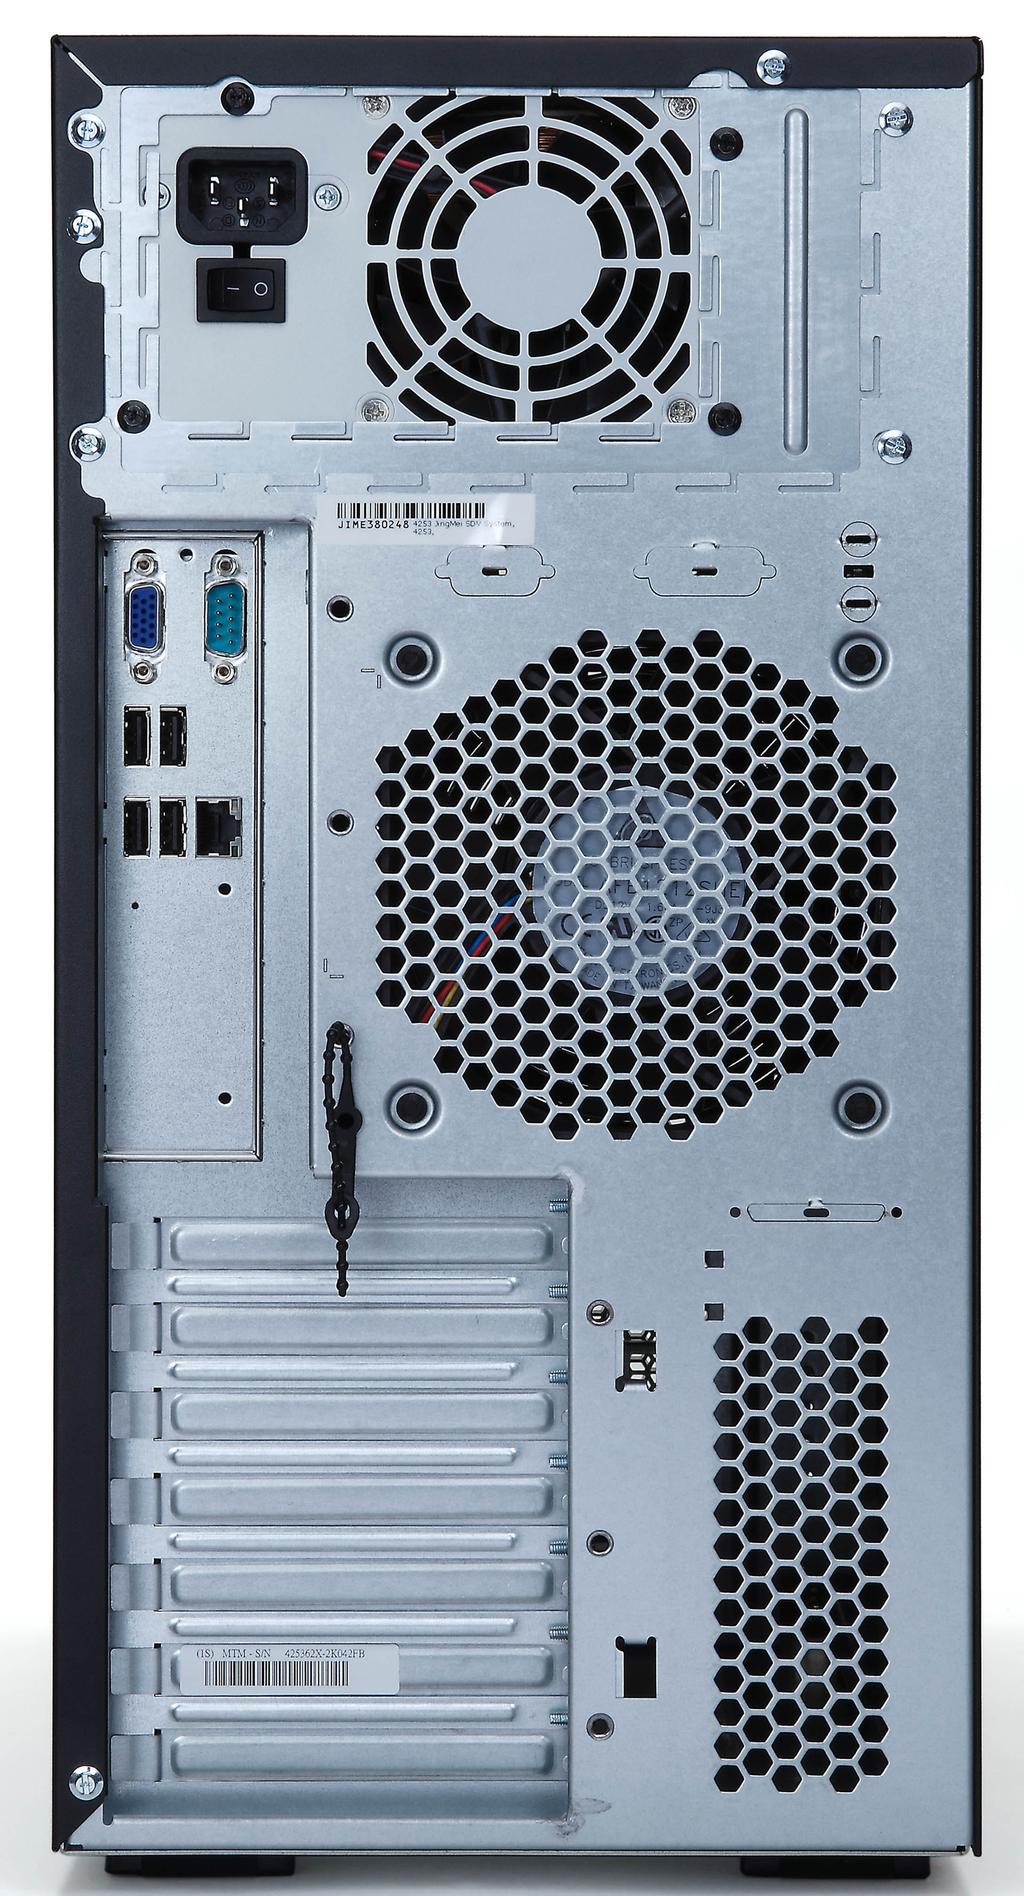 Outstanding value in a high-performance single-socket tower performance of your System x s. The choice of hard disk drives can be a critical aspect of maximizing the I/O throughput of the system.